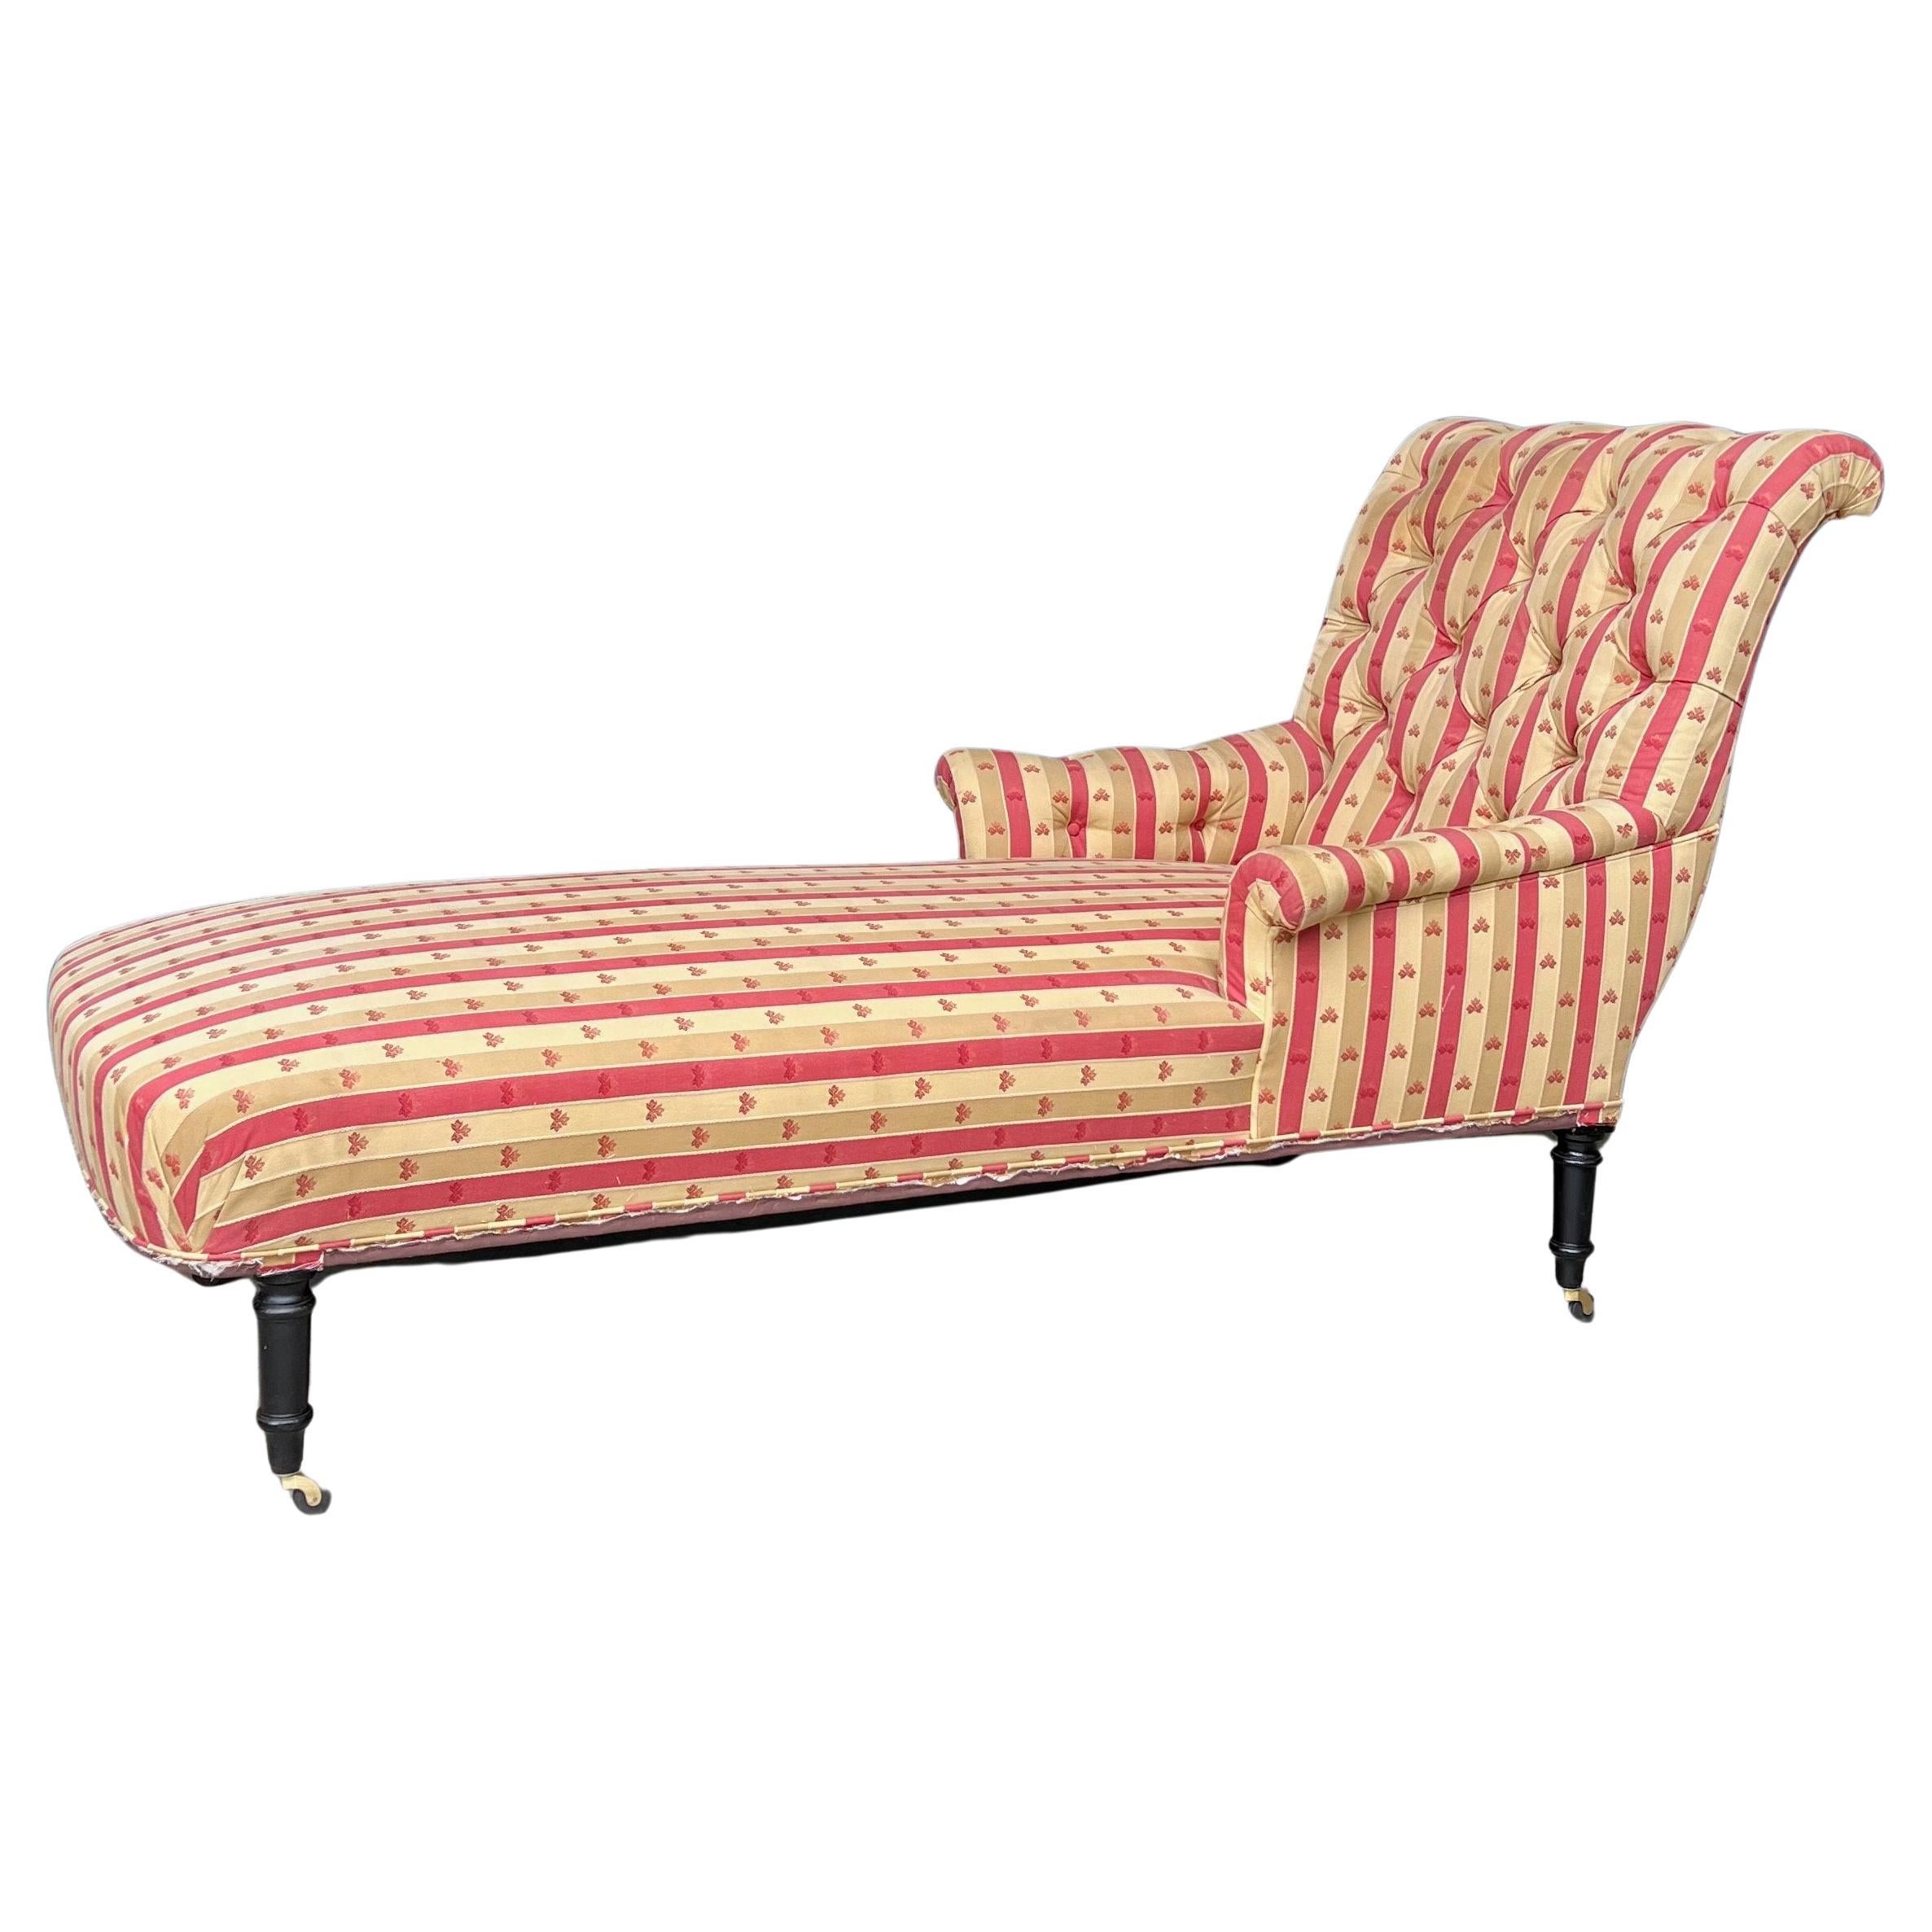 Large French Scrolled Back Chaise Longue in Striped Patterned Fabric  For Sale